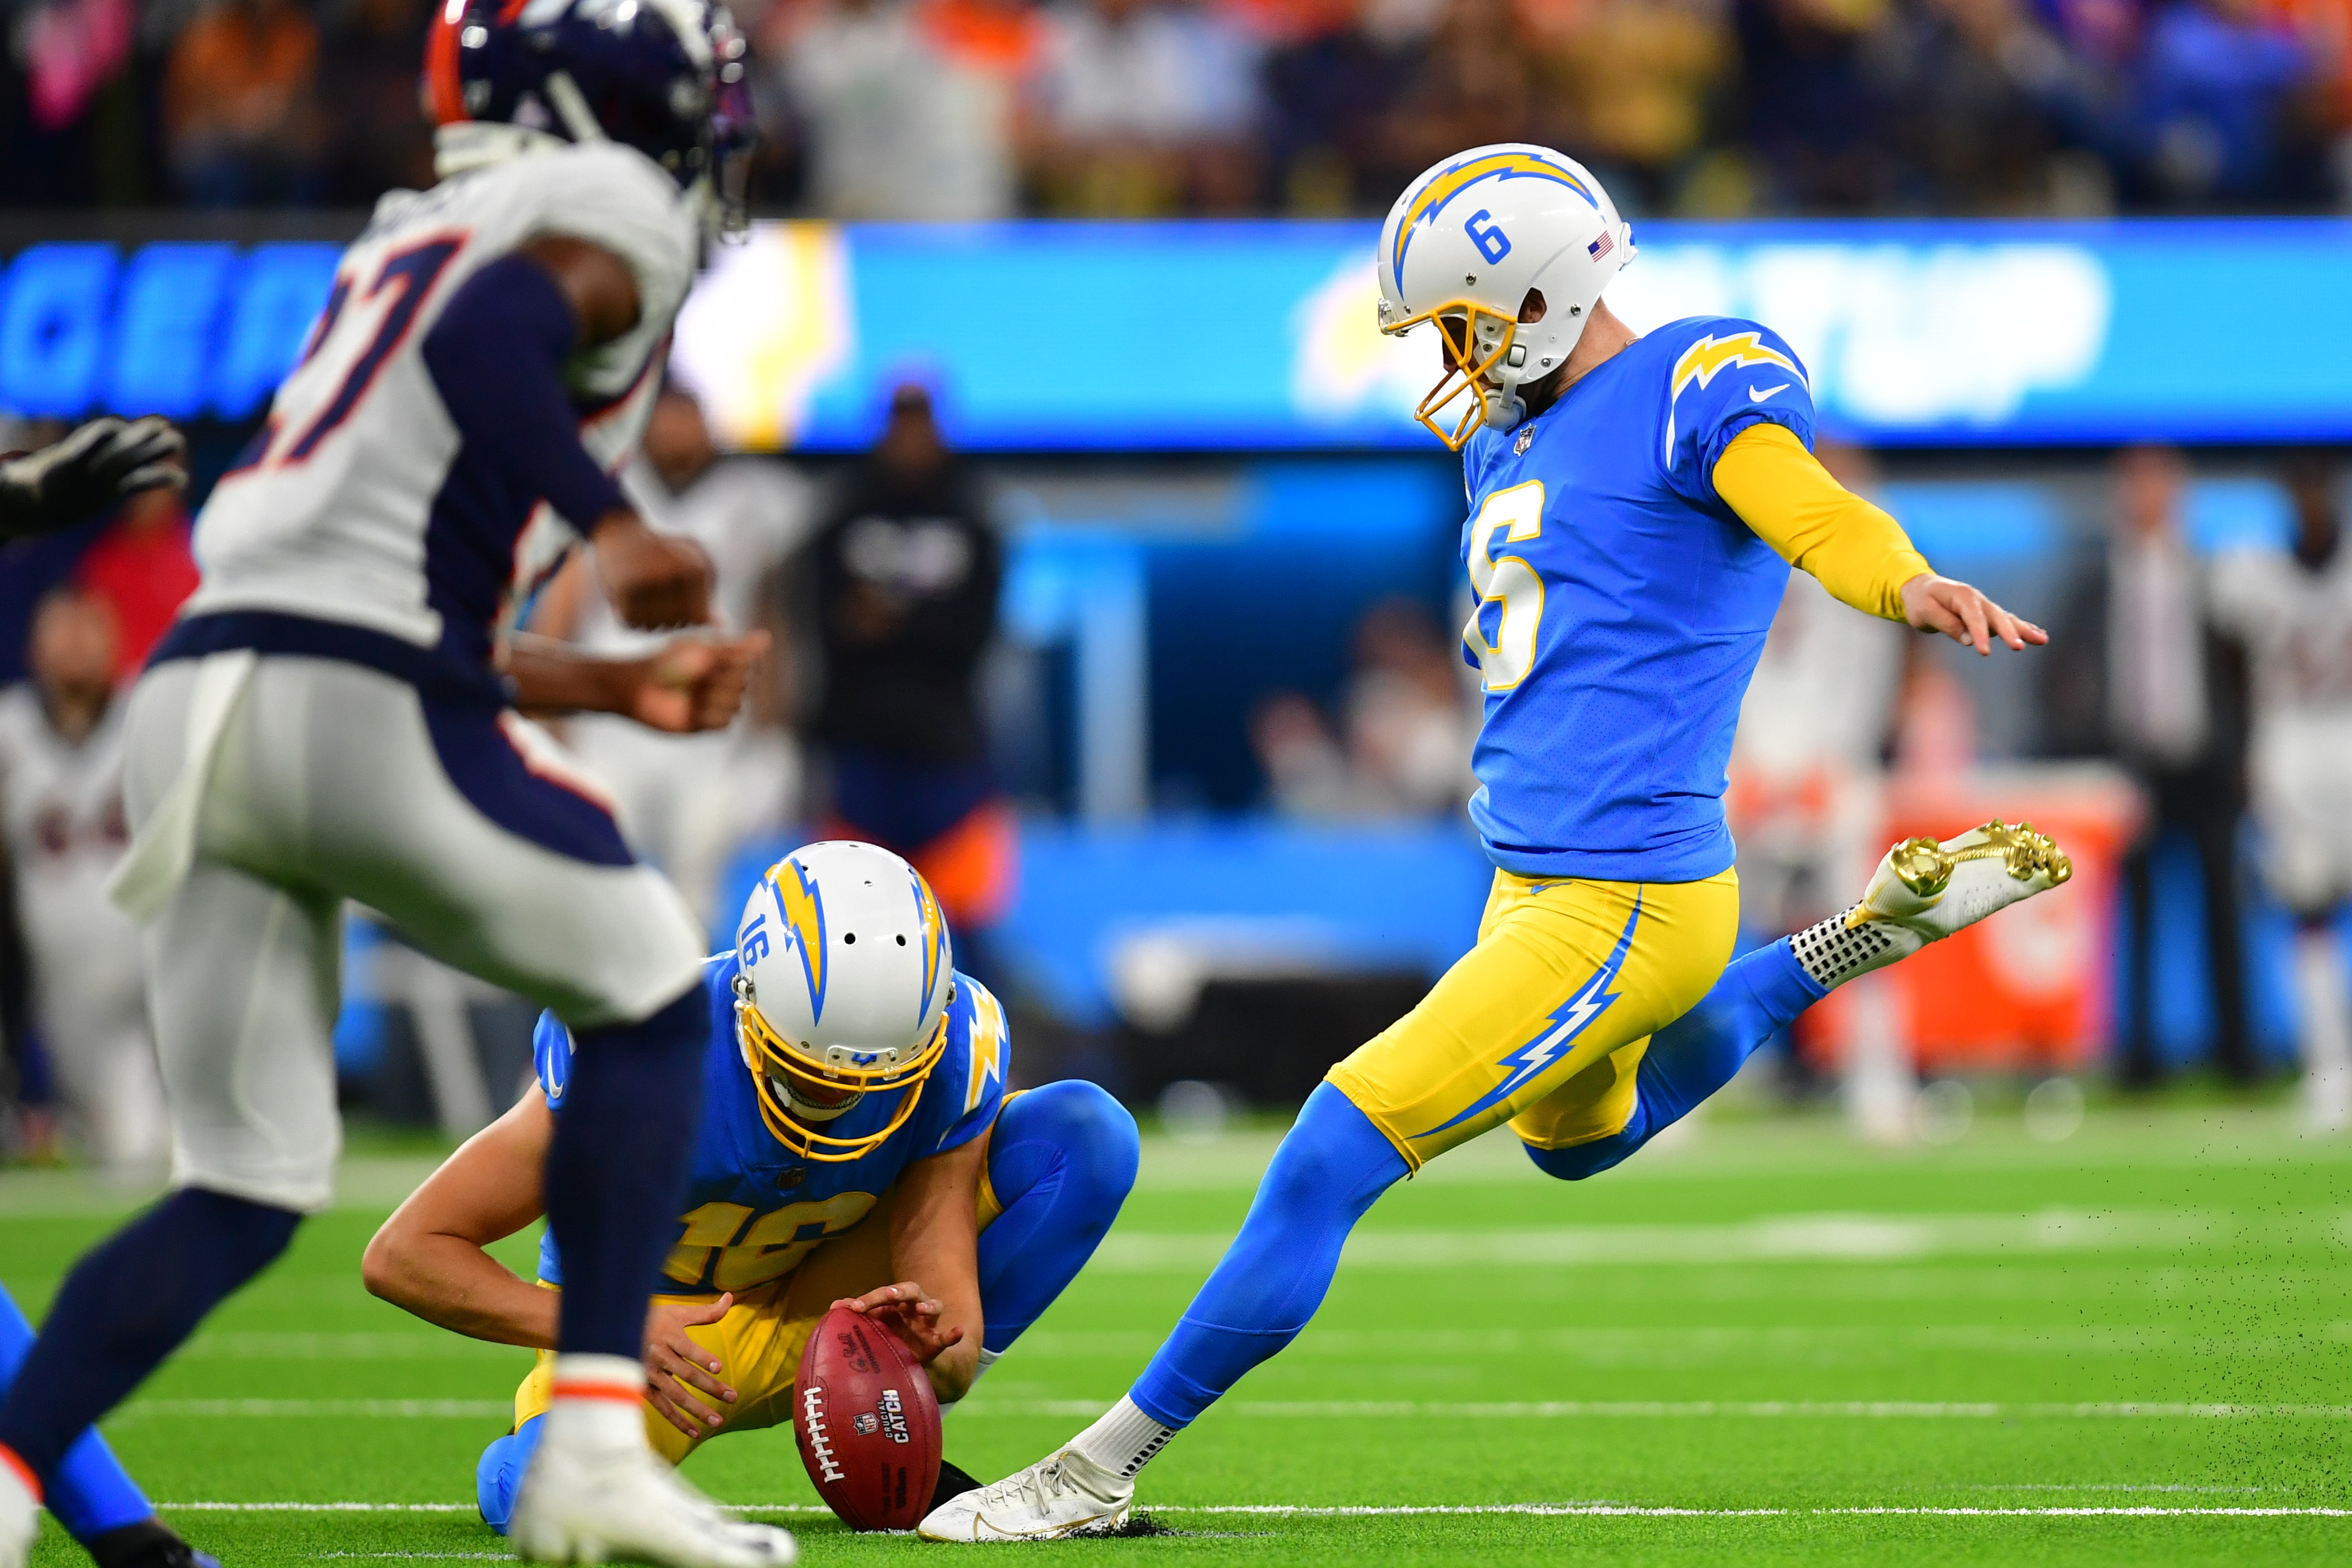 Chargers K Dustin Hopkins Hits Game-Winning Field Goal on Injured Leg to Beat Broncos 19-16 in Overtime